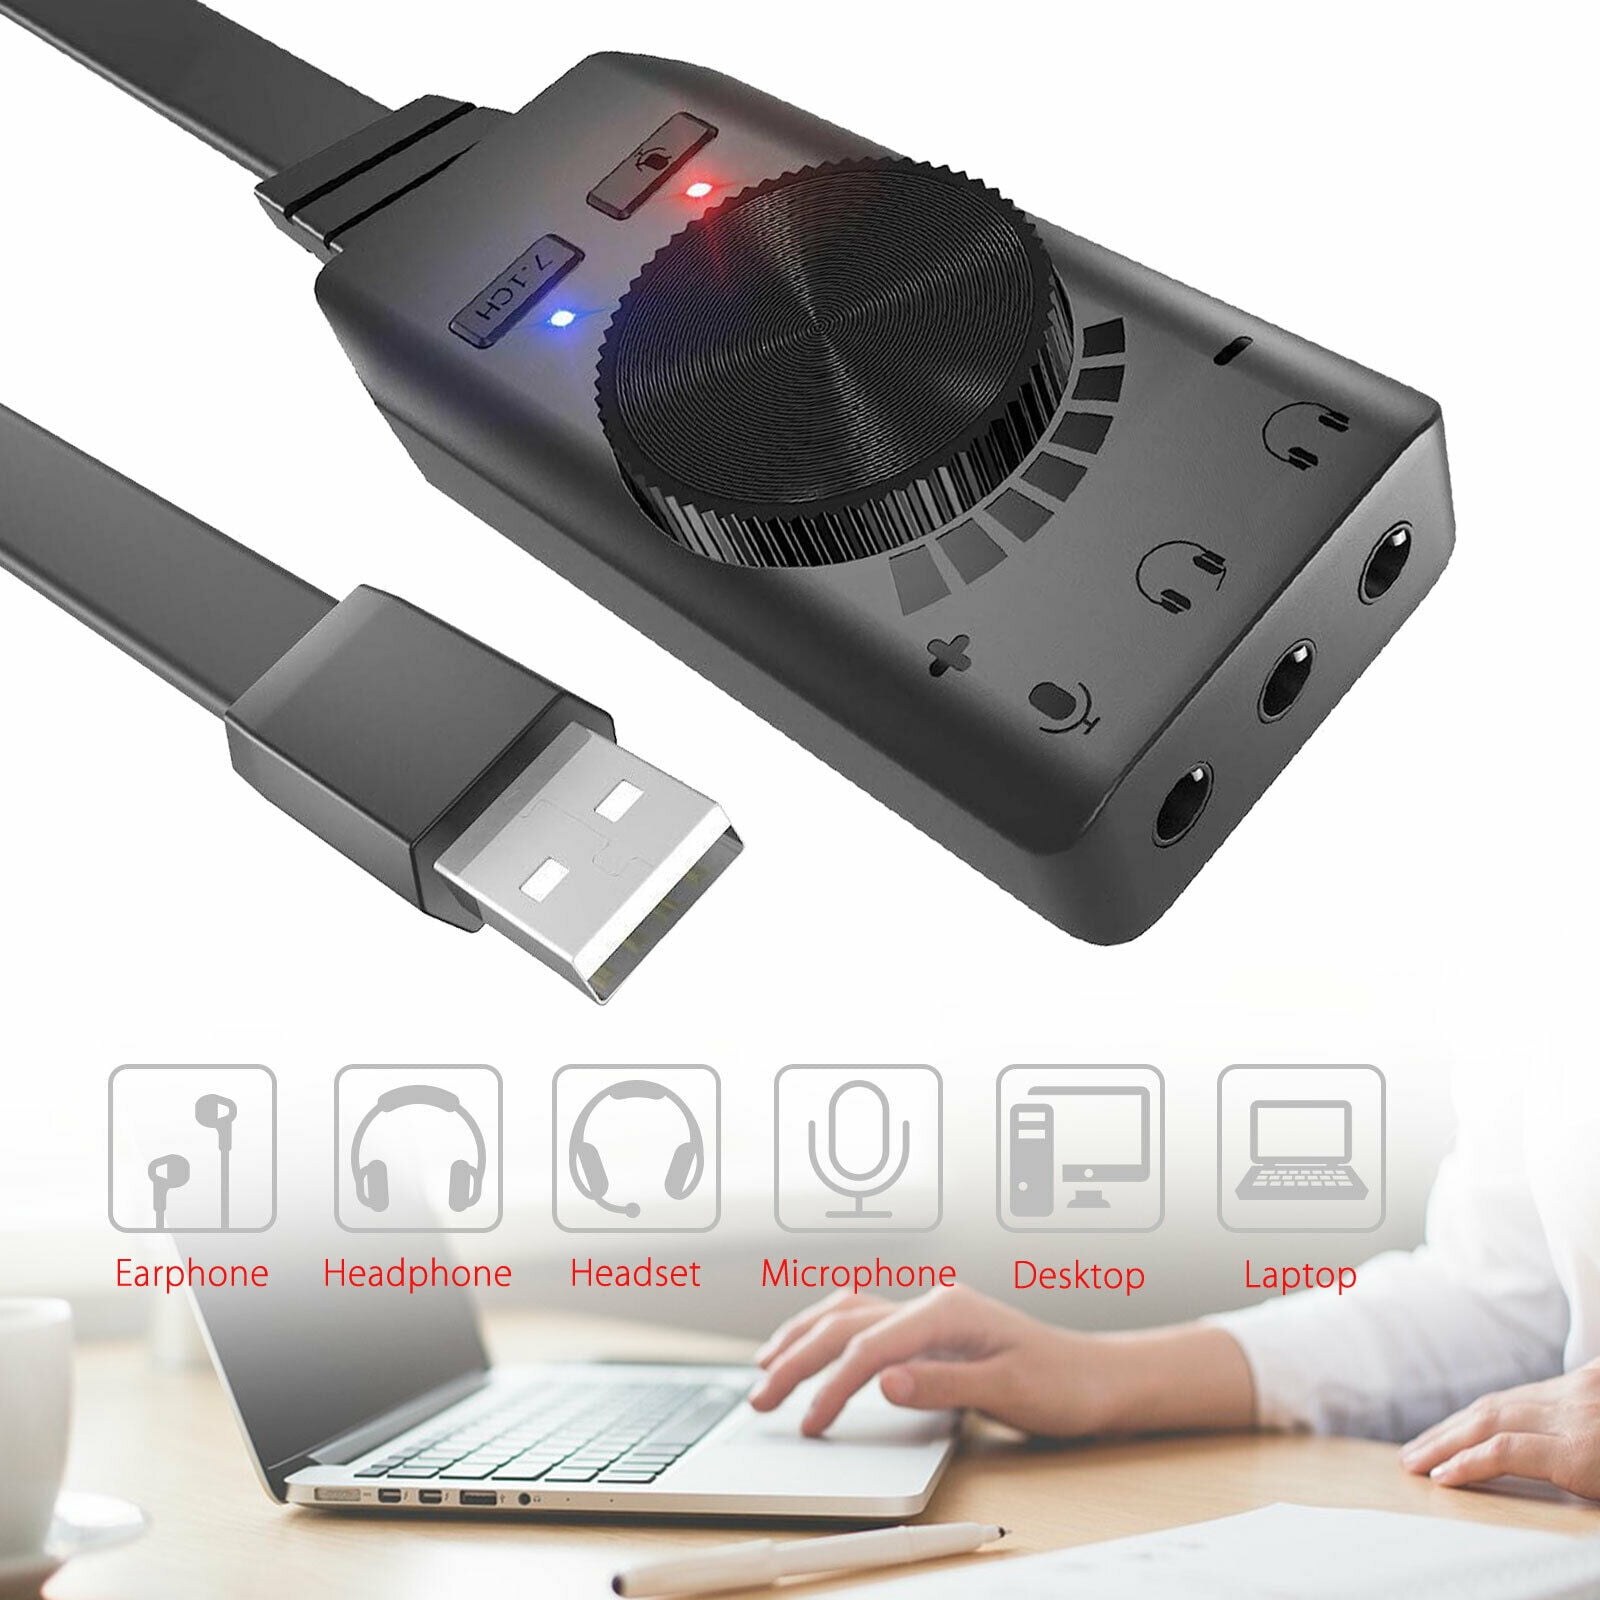 External USB Sound Card Audio Adapter 3.5mm Stereo For Headset Mic PS4 Laptop - Walmart.com